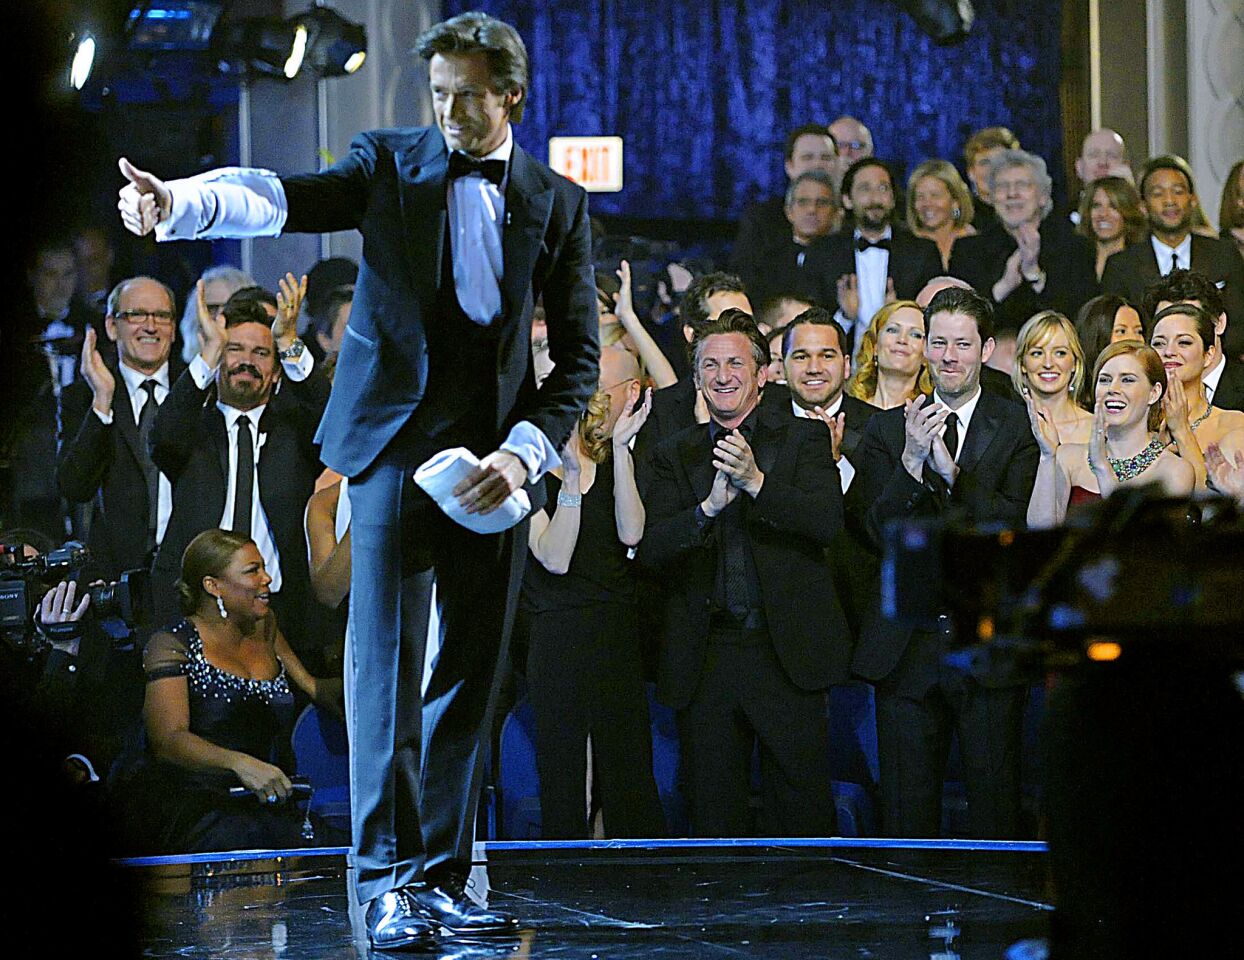 Hugh Jackman opens the show at the 81st Academy Awards at the Kodak Theatre in Hollywood.